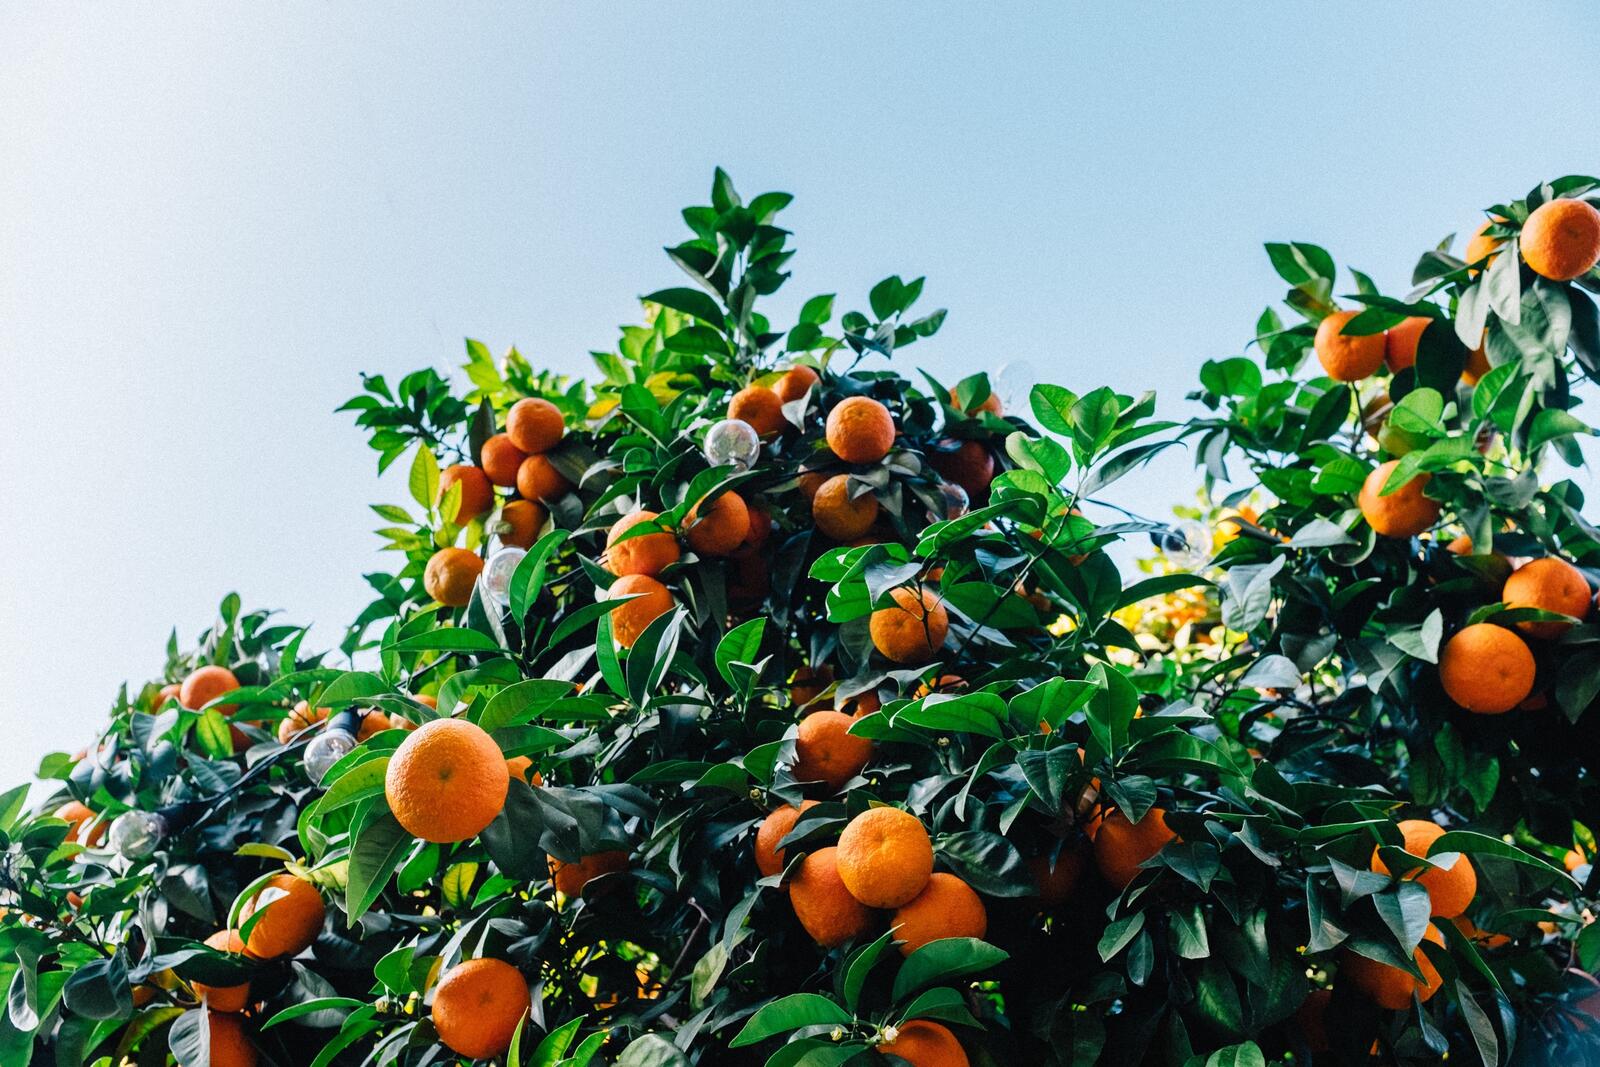 Free photo A tree with mandarins growing on it